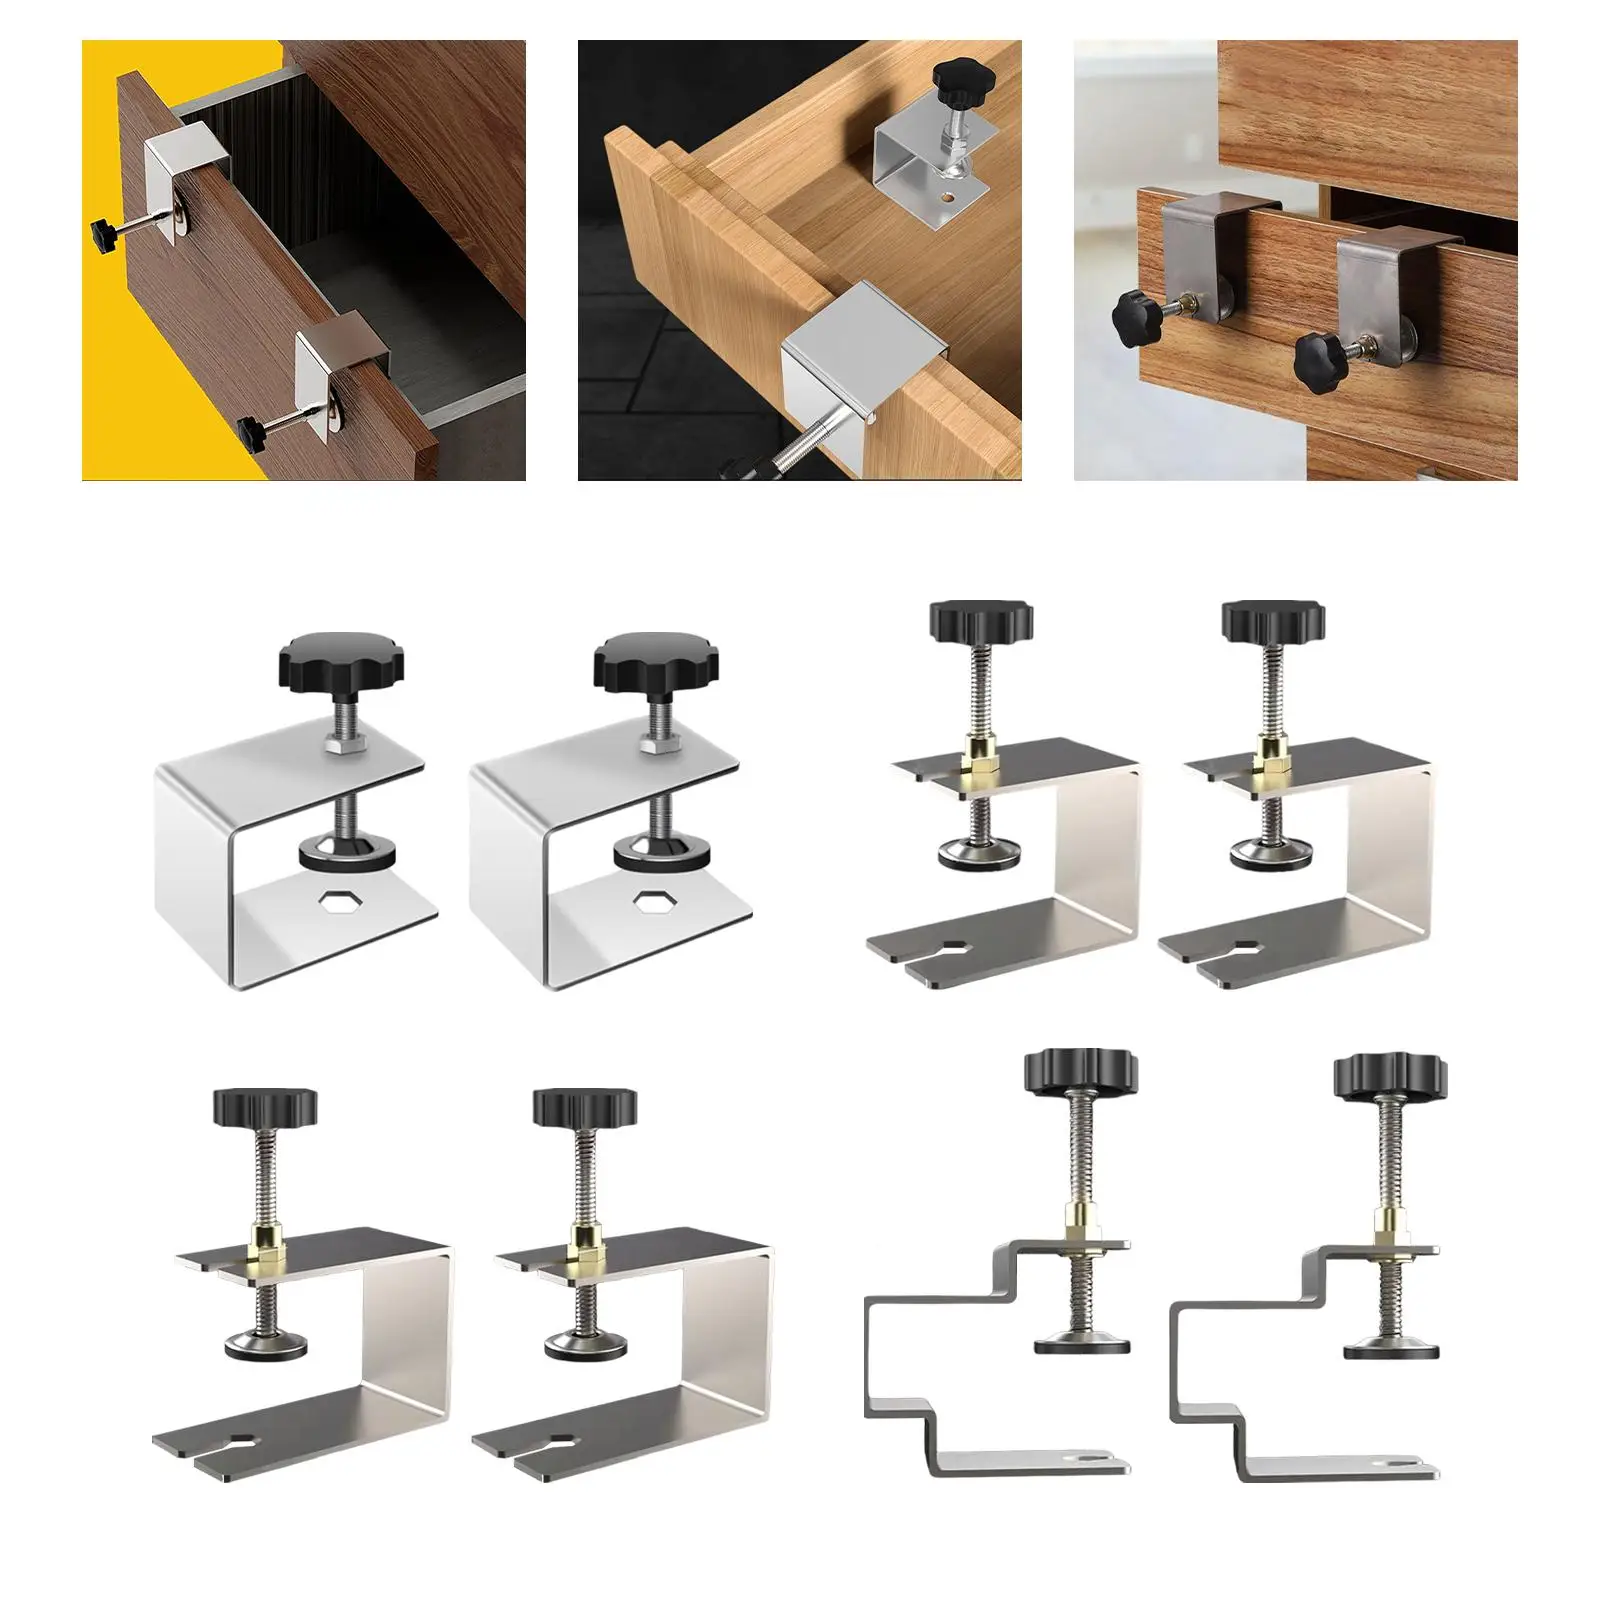 2x Universal Woodworking Clamp Drawer Front Clamps Accessories Adjustment Fixing Clip Fasten Stable Hardware Smooth